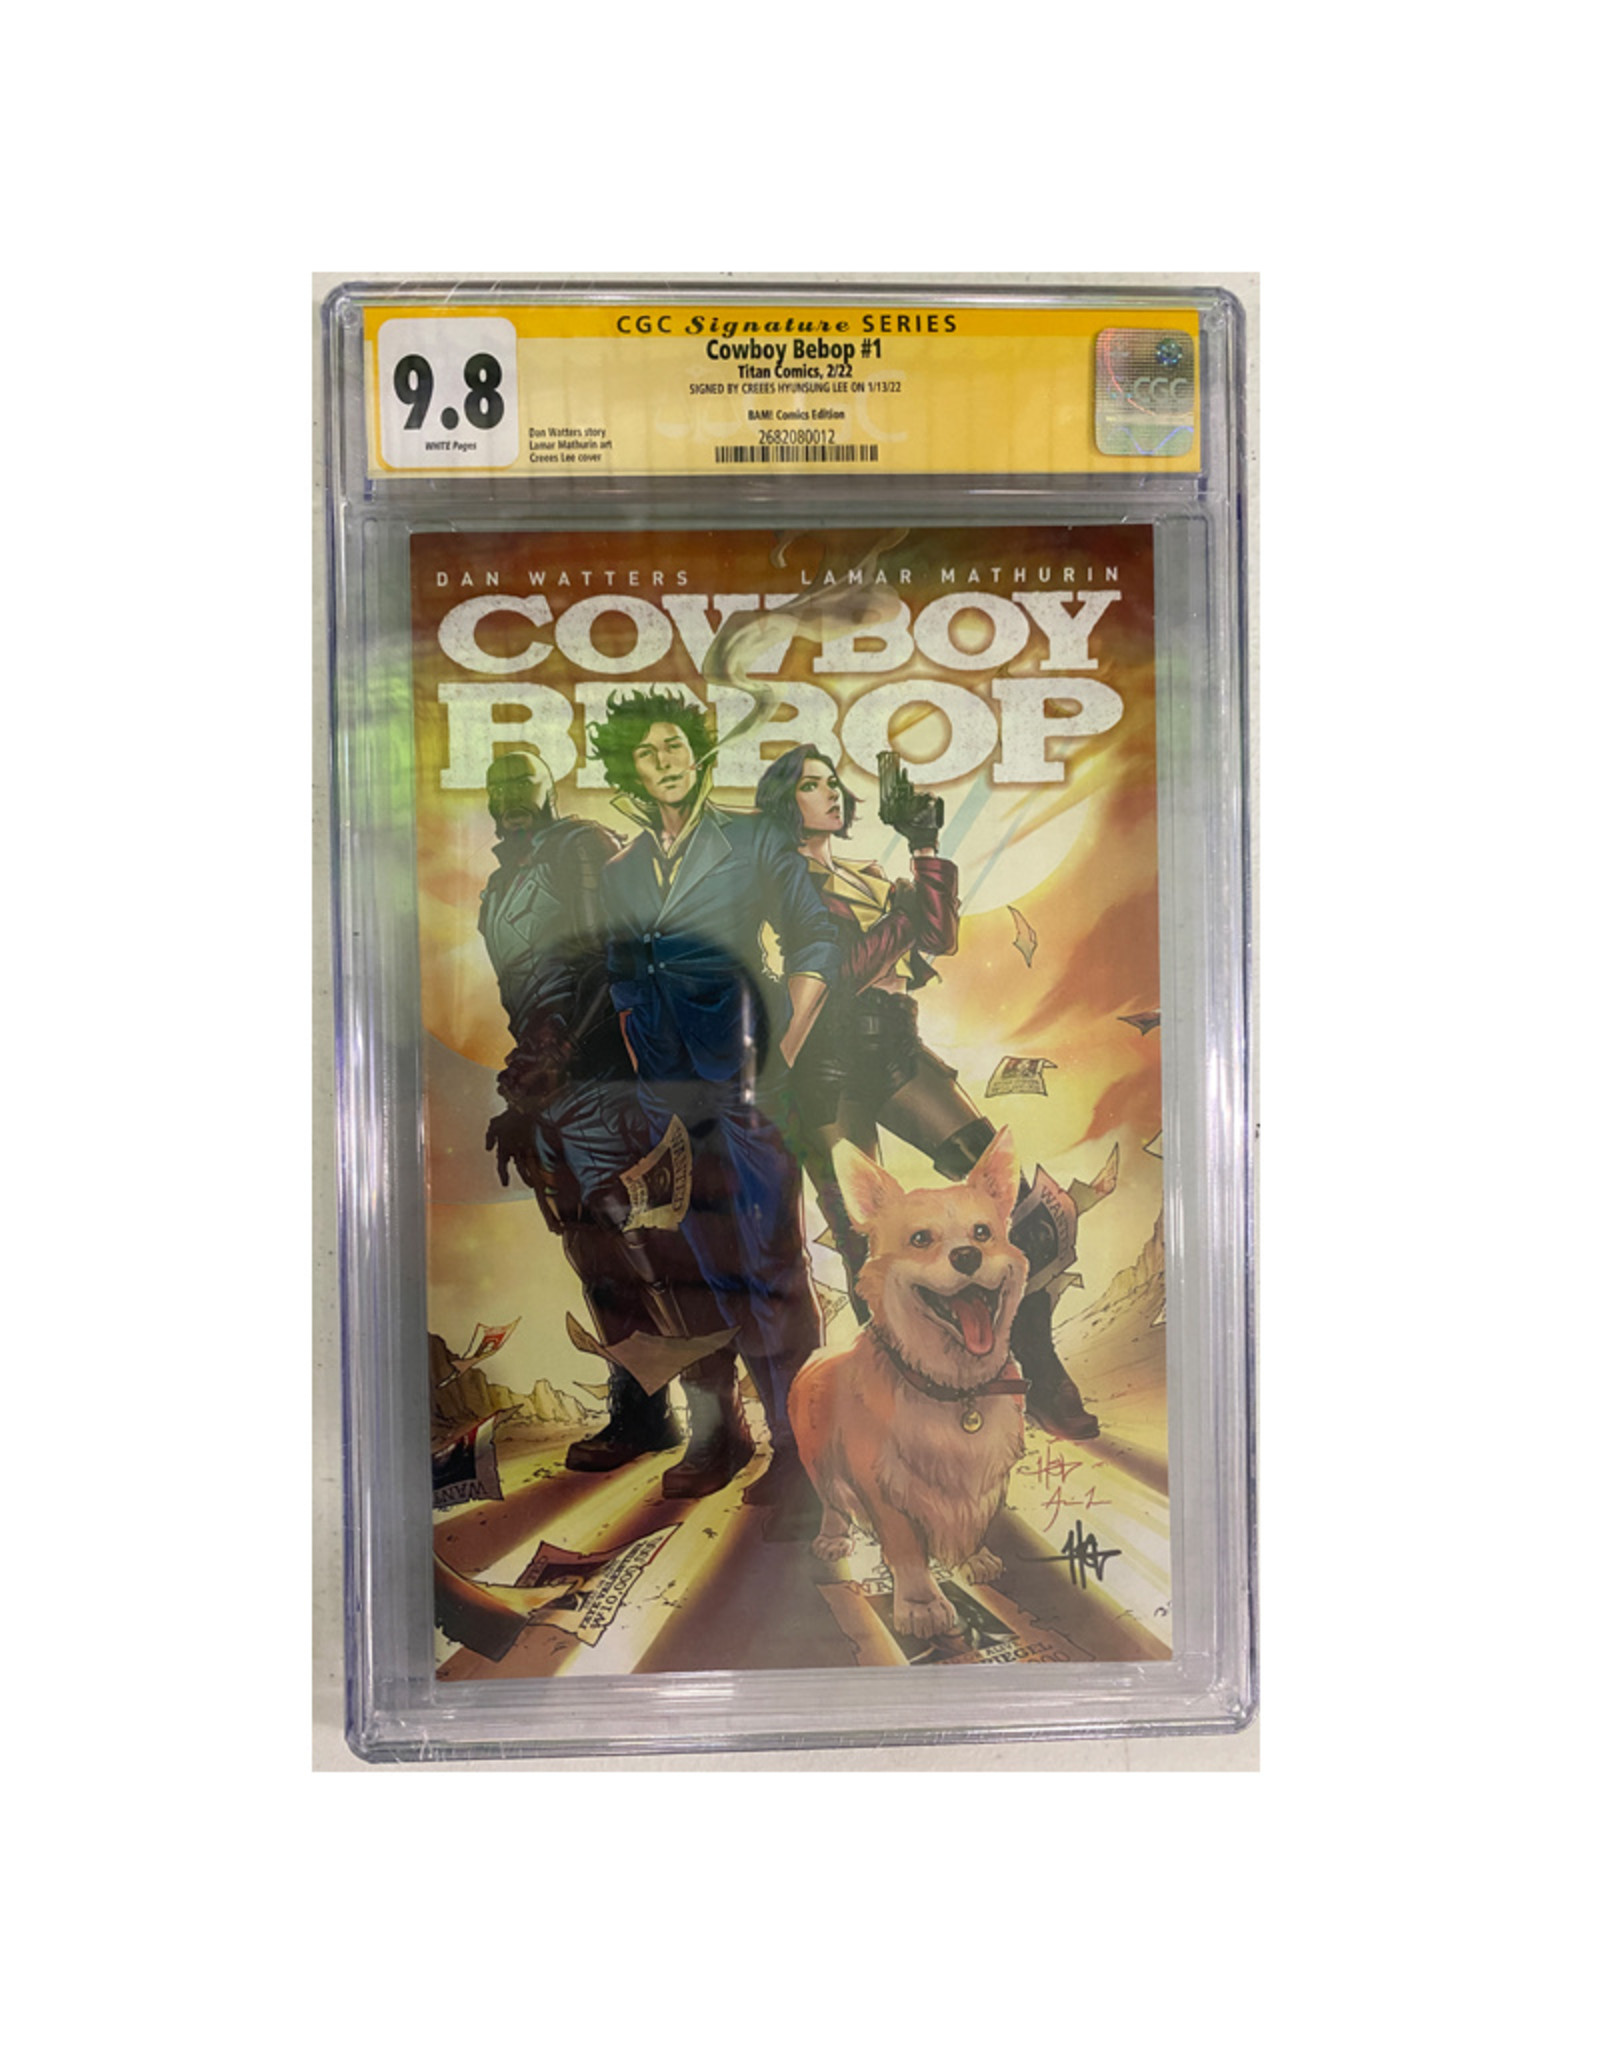 Titan Comics Cowboy Bebop #1 Bam Exclusive cover CGC graded 9.8 signed by  Creees Lee